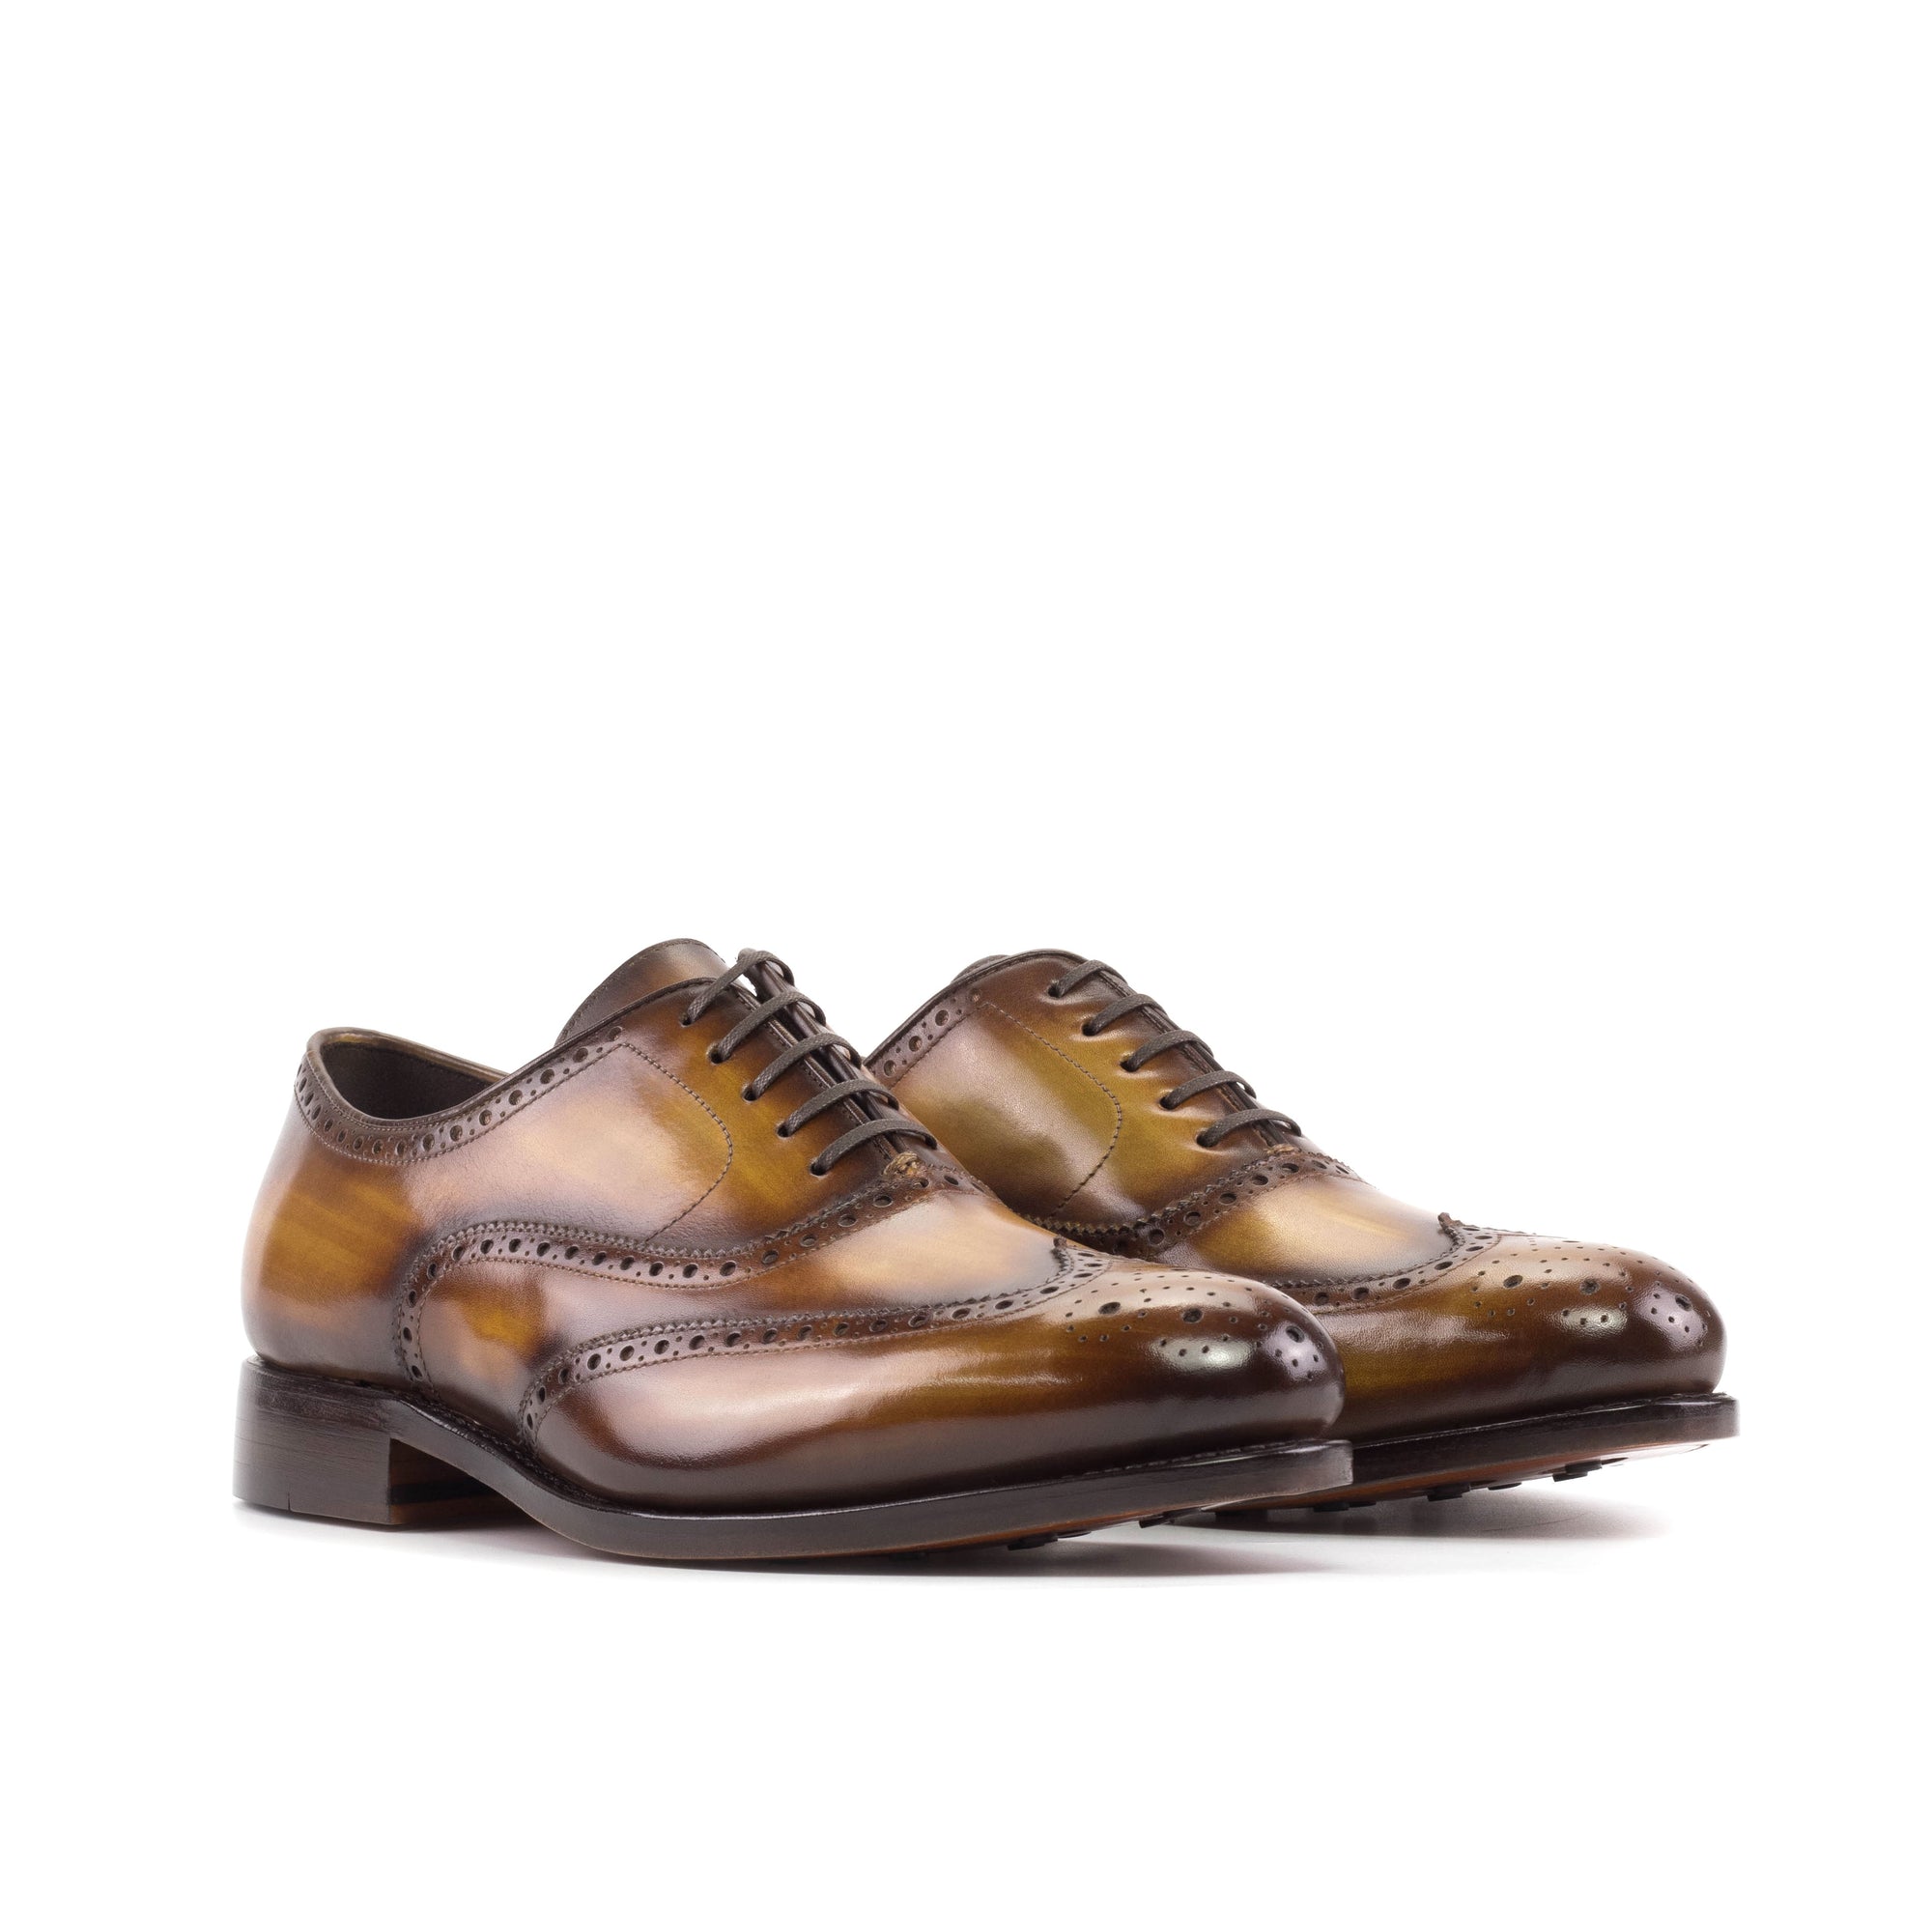 Wingtip Full Brogue in handprinted patina calf crust leather in cognac colour and Leather sole